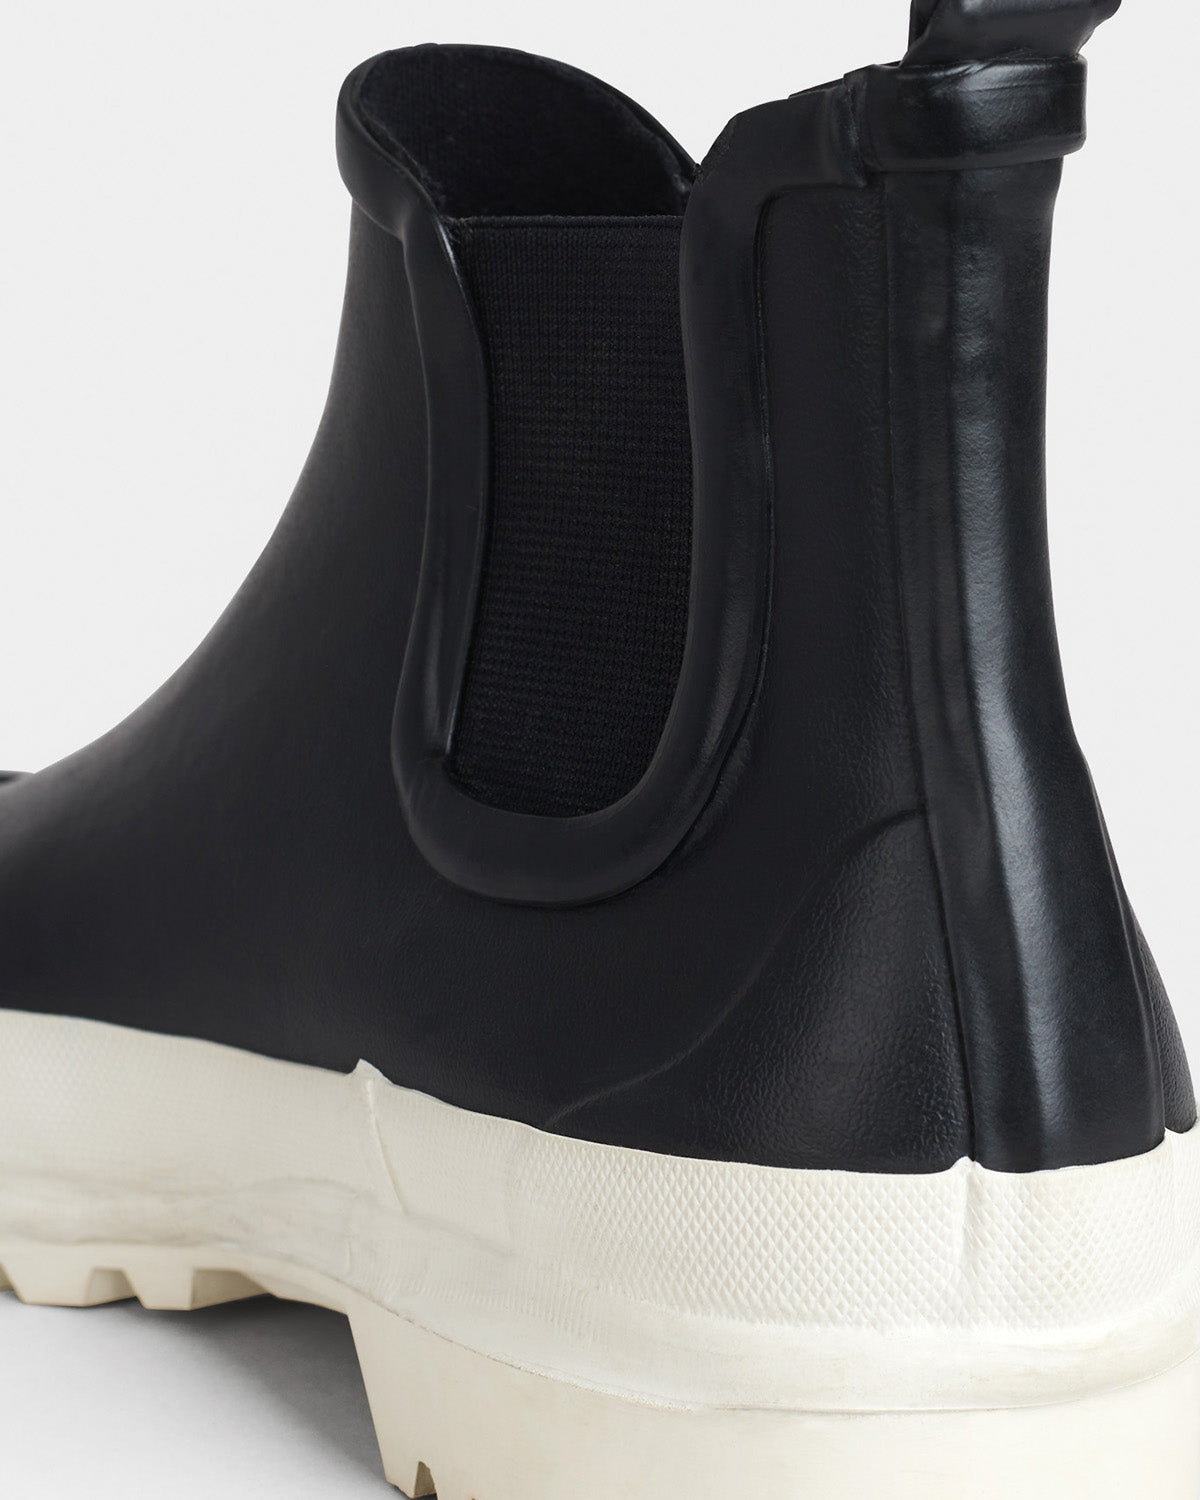 Chelsea Rainboots in color black with white sole by Ilse Jacobsen